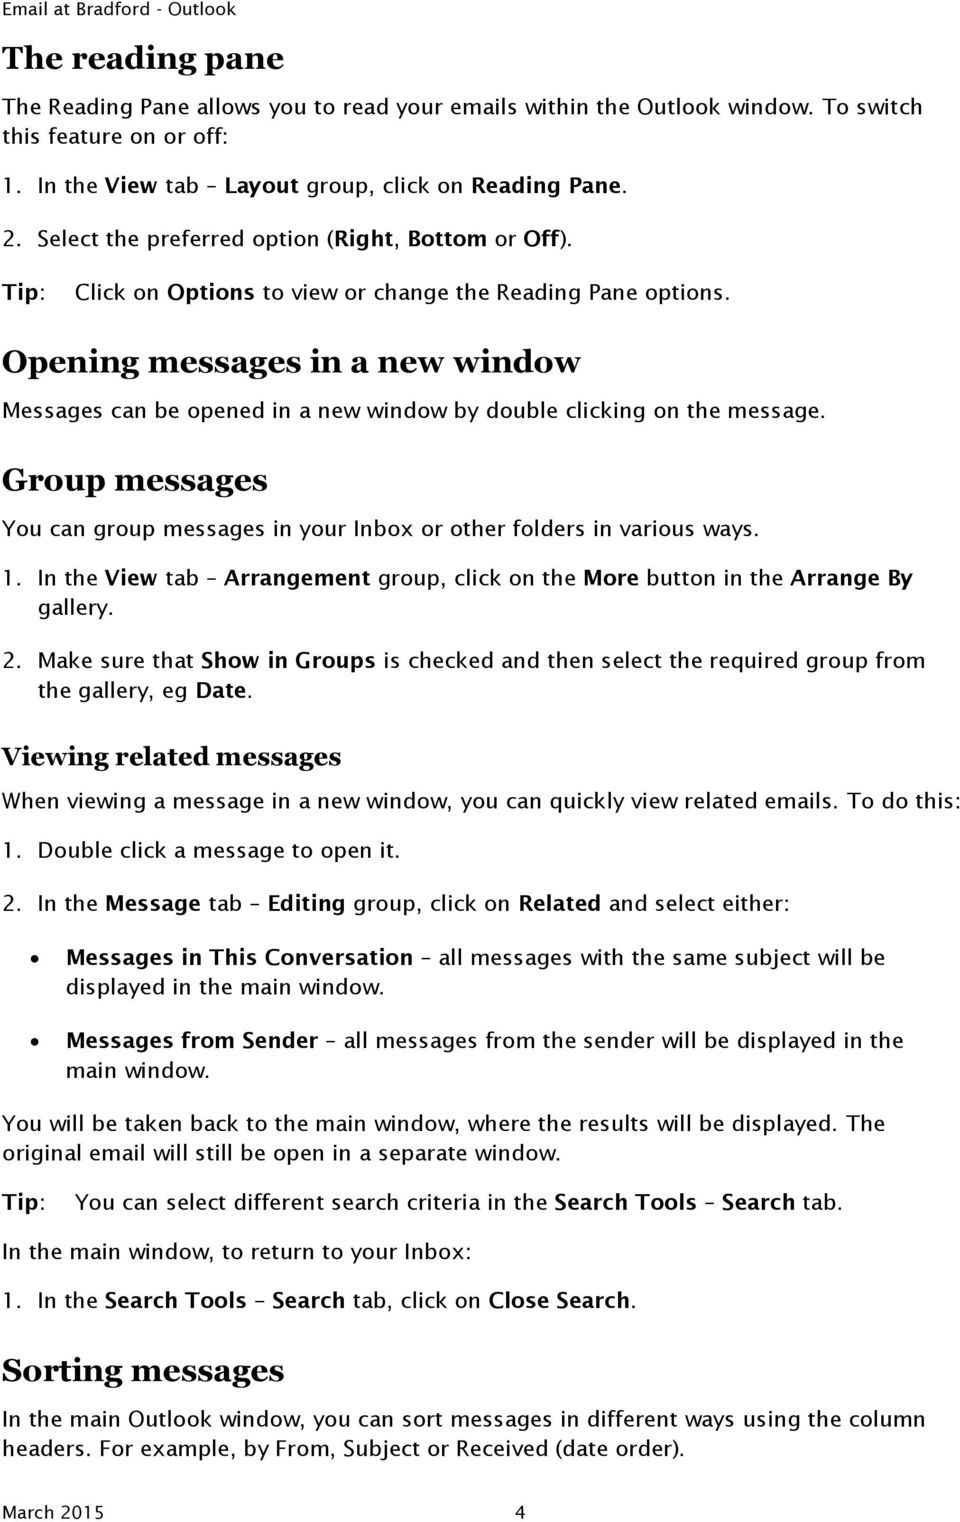 Opening messages in a new window Messages can be opened in a new window by double clicking on the message. Group messages You can group messages in your Inbox or other folders in various ways. 1.